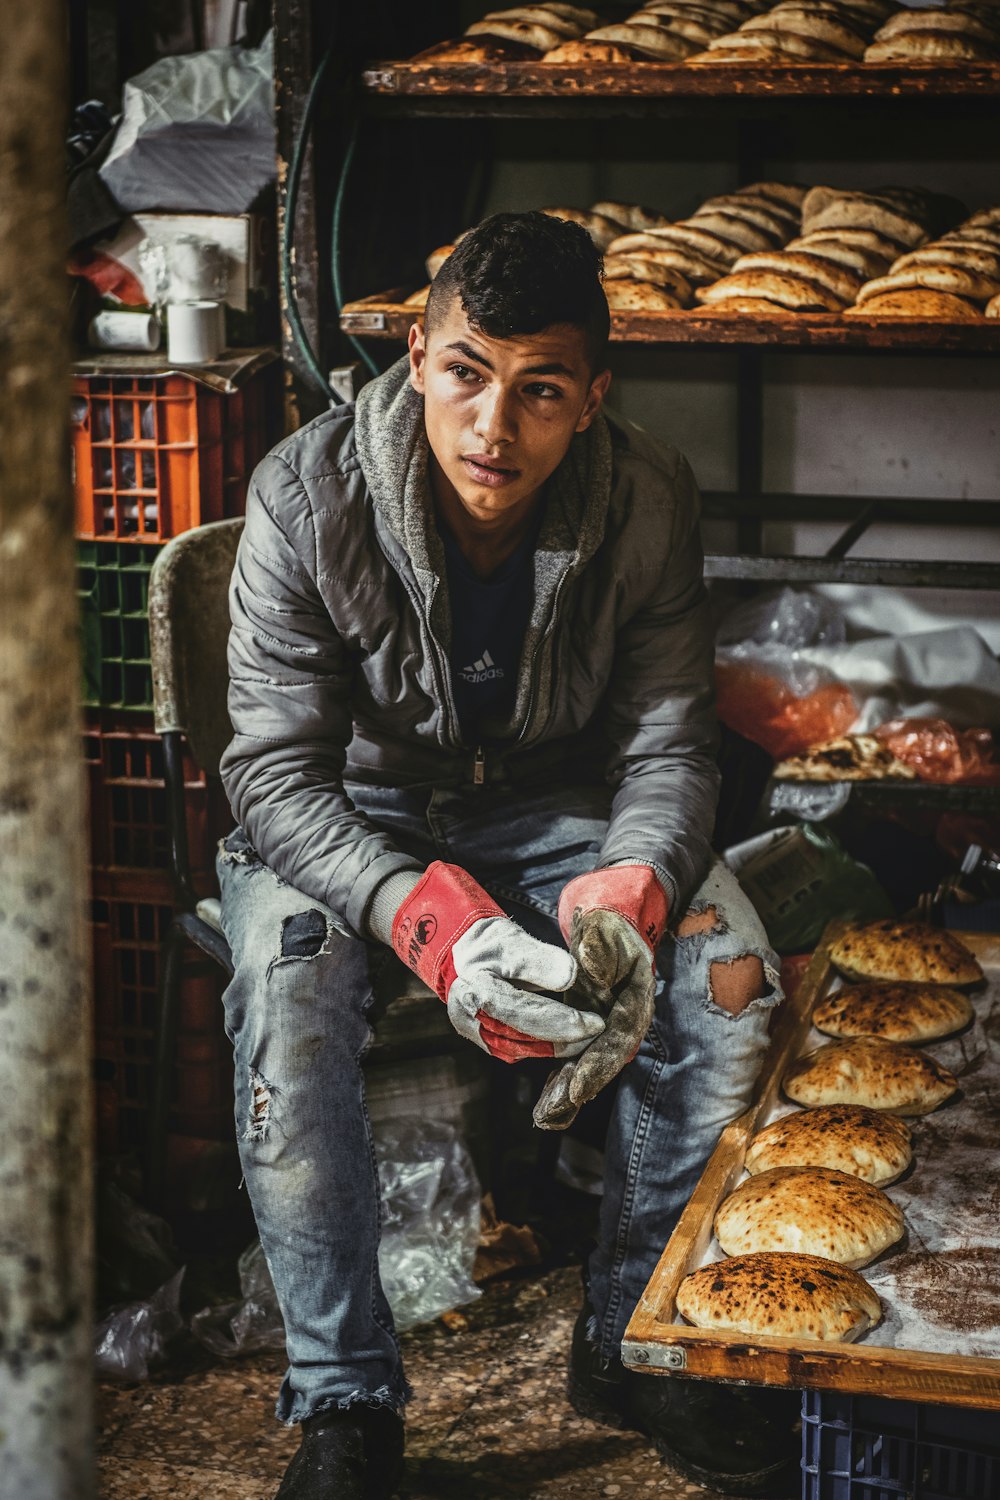 man sitting on chair near baked breads